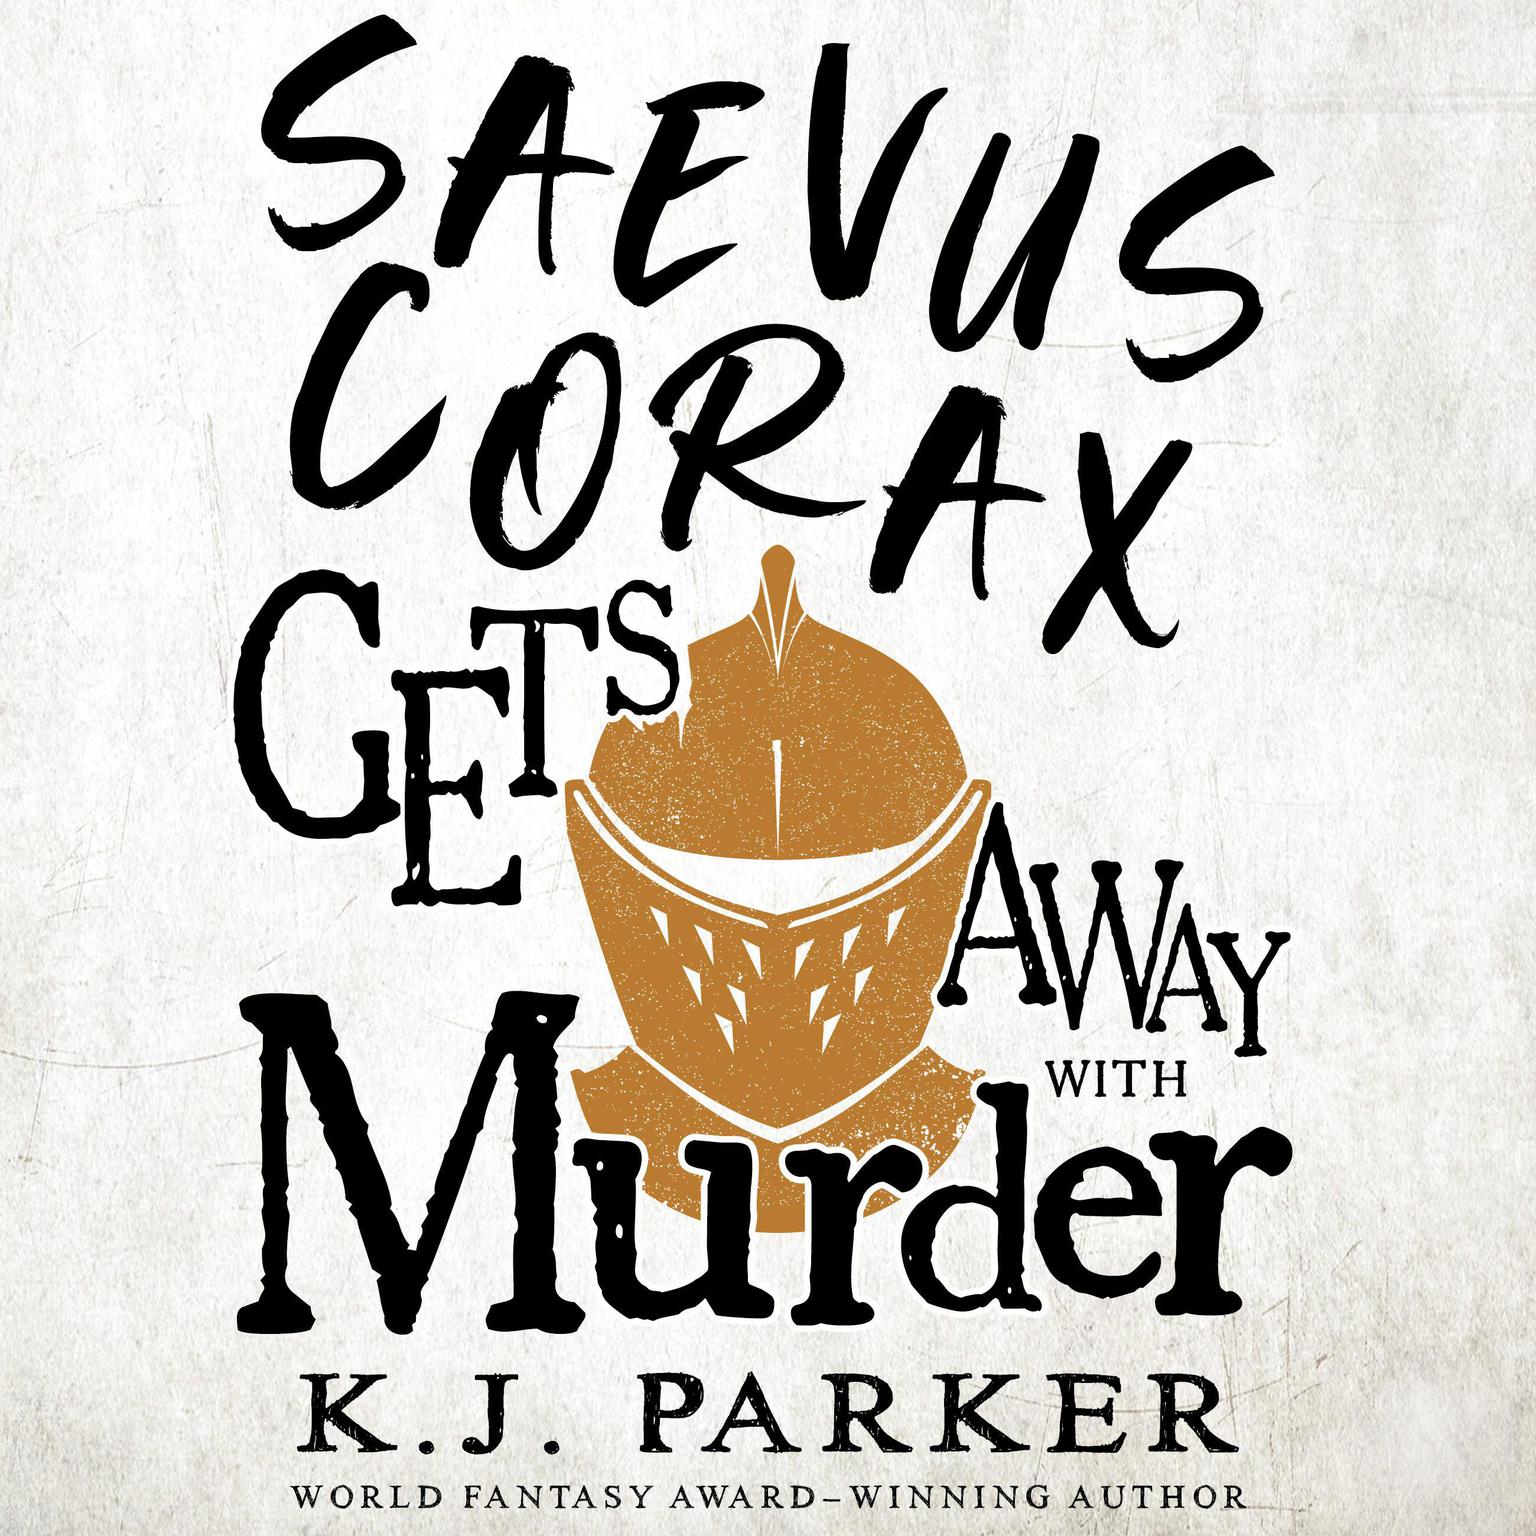 Saevus Corax Gets Away With Murder Audiobook, by K. J. Parker